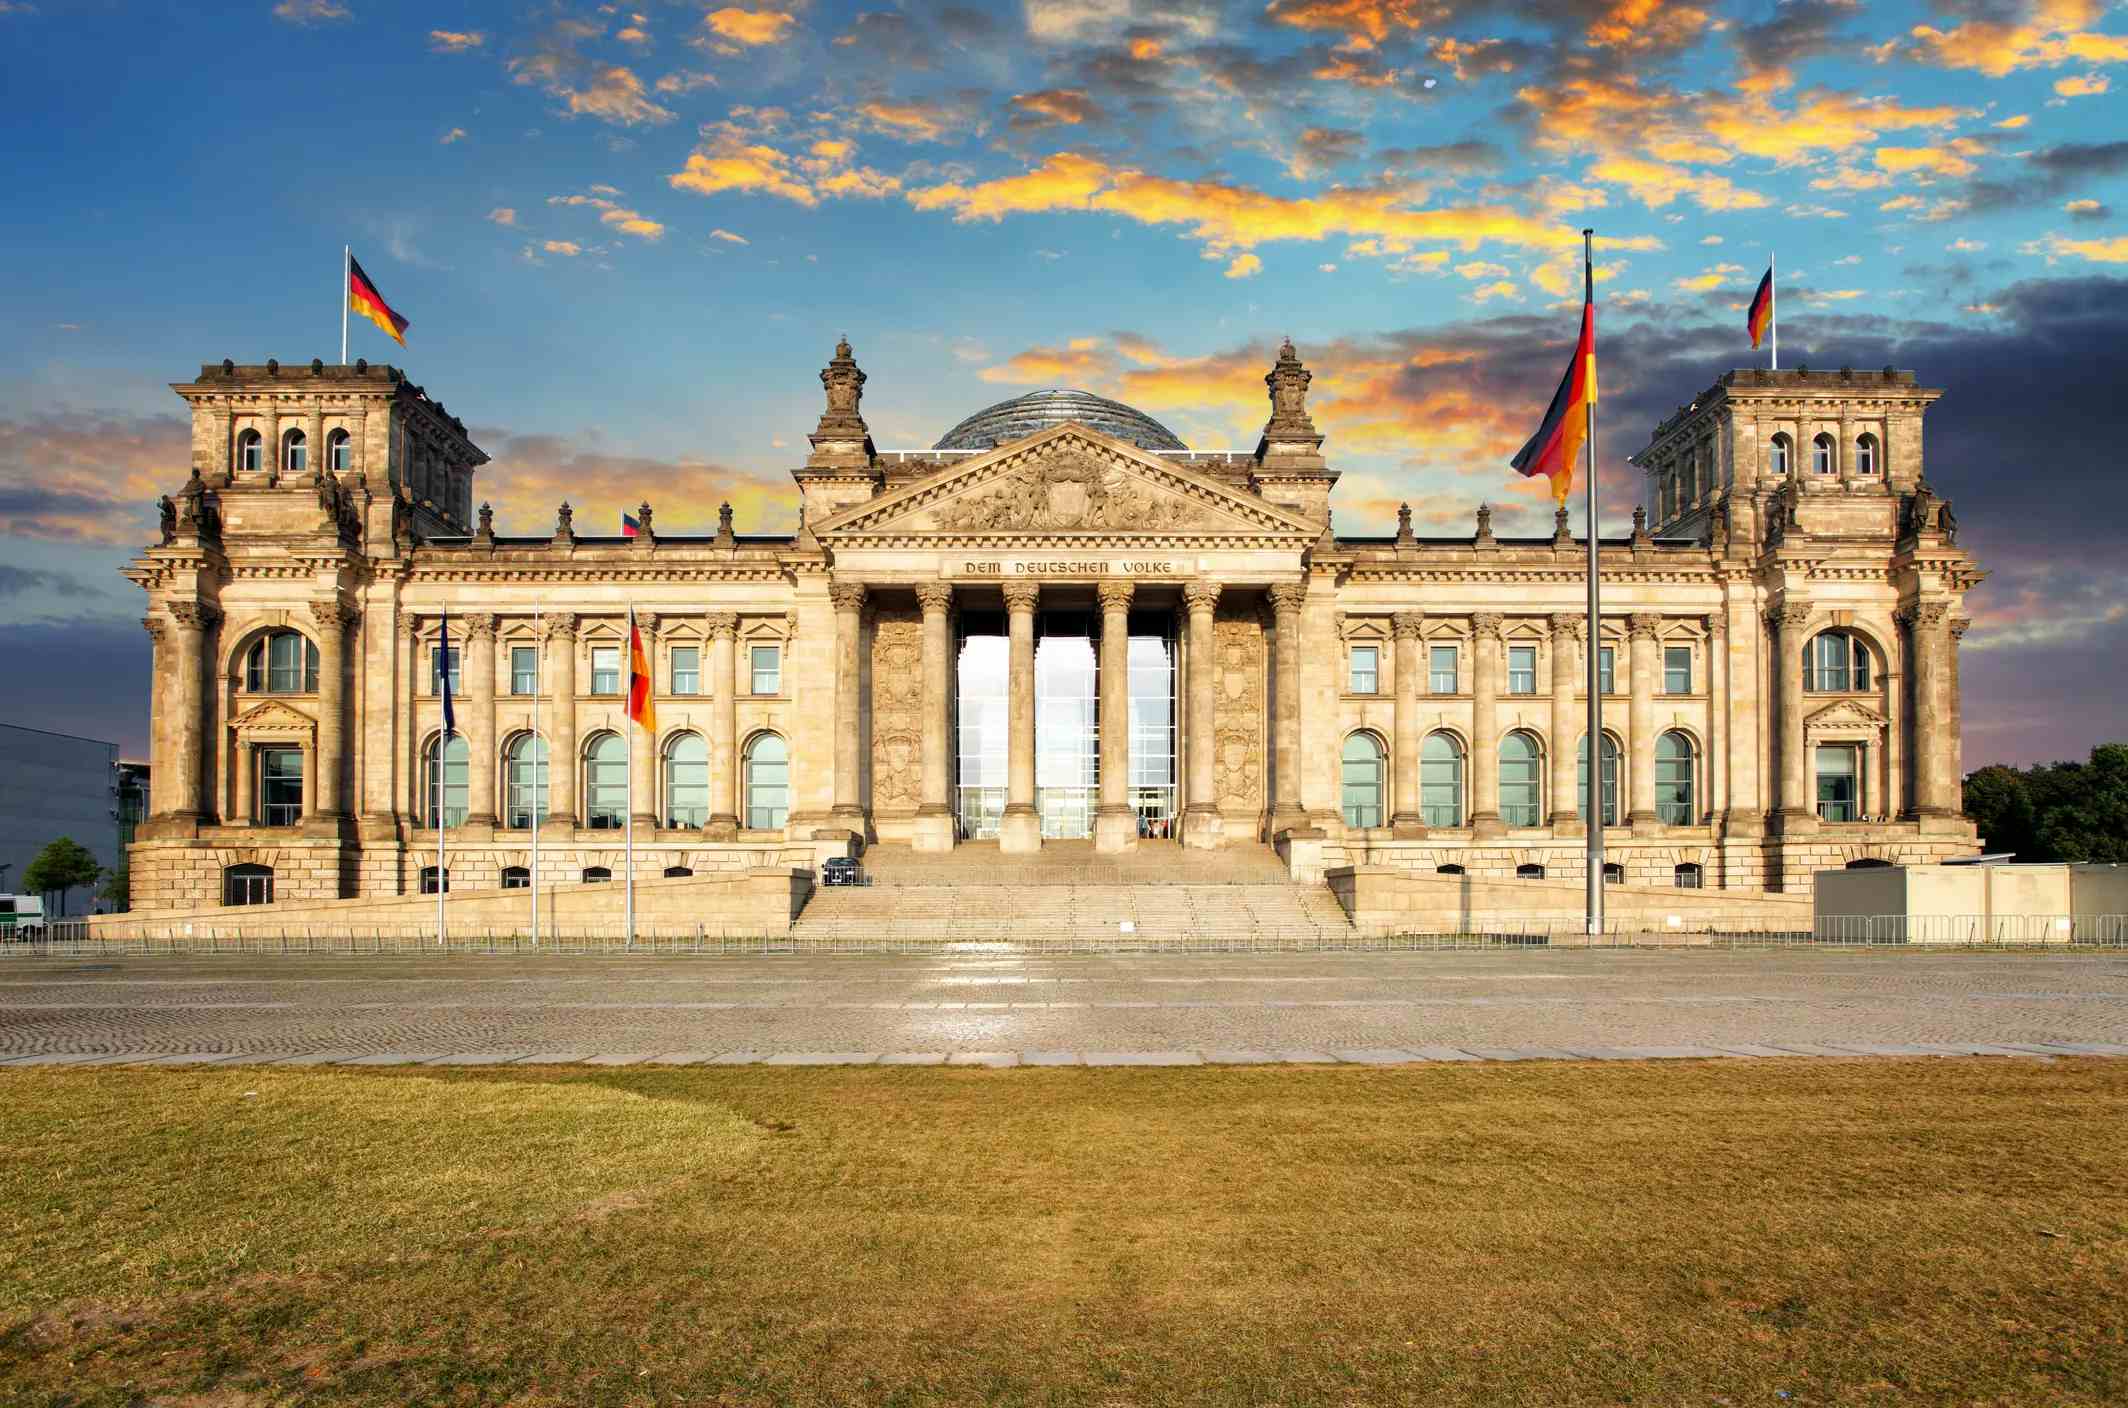 Reichstag Building image